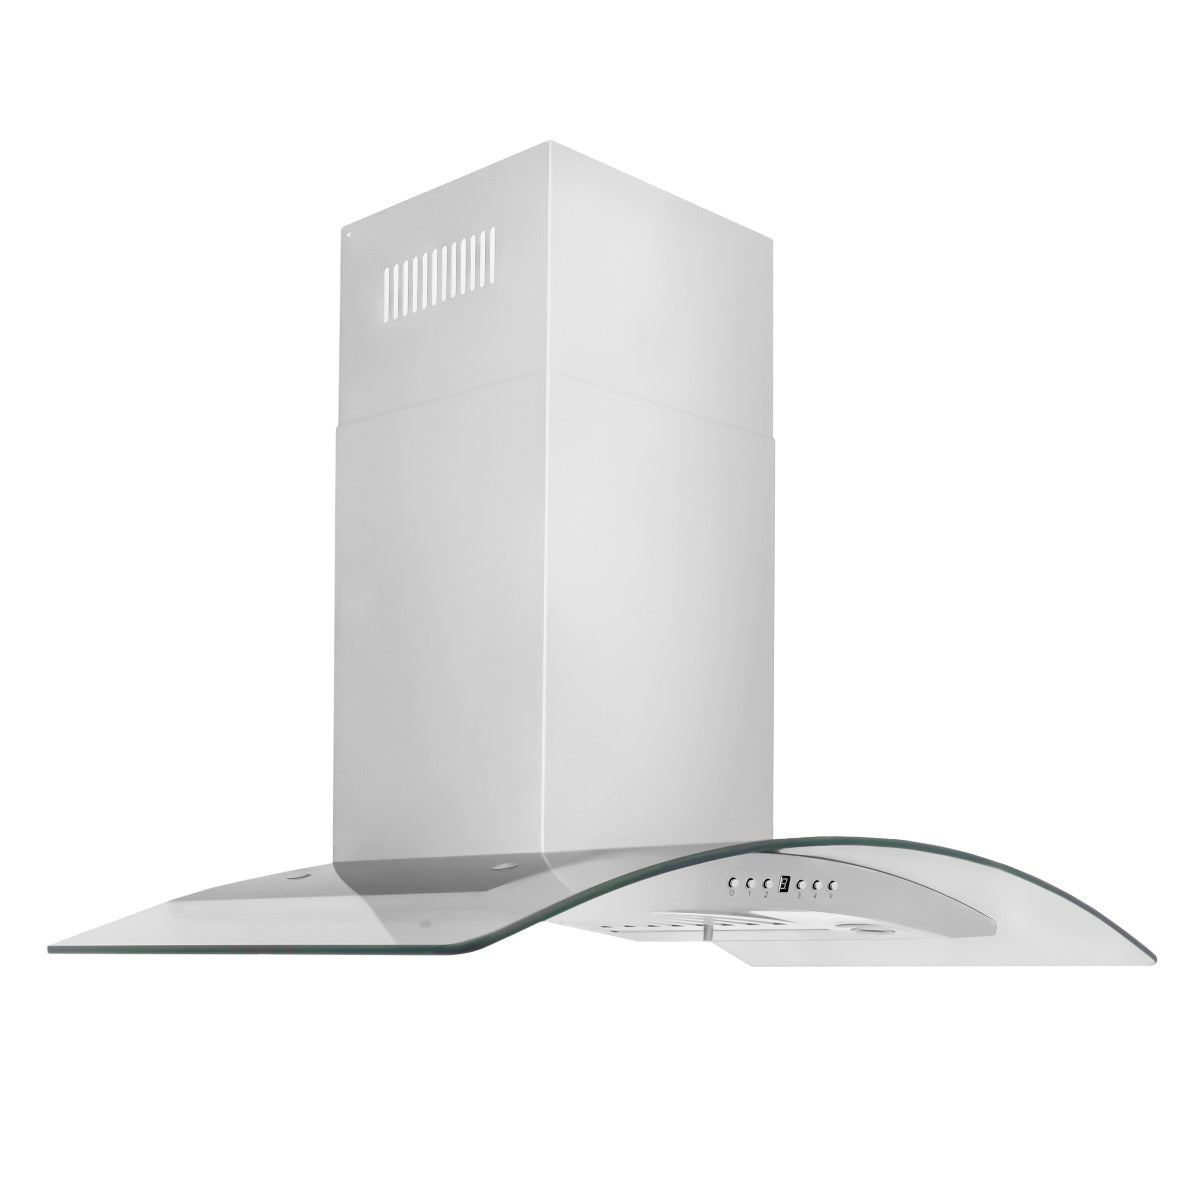 ZLINE 48 in. Convertible Vent Wall Mount Range Hood in Stainless Steel & Glass, KN4-48